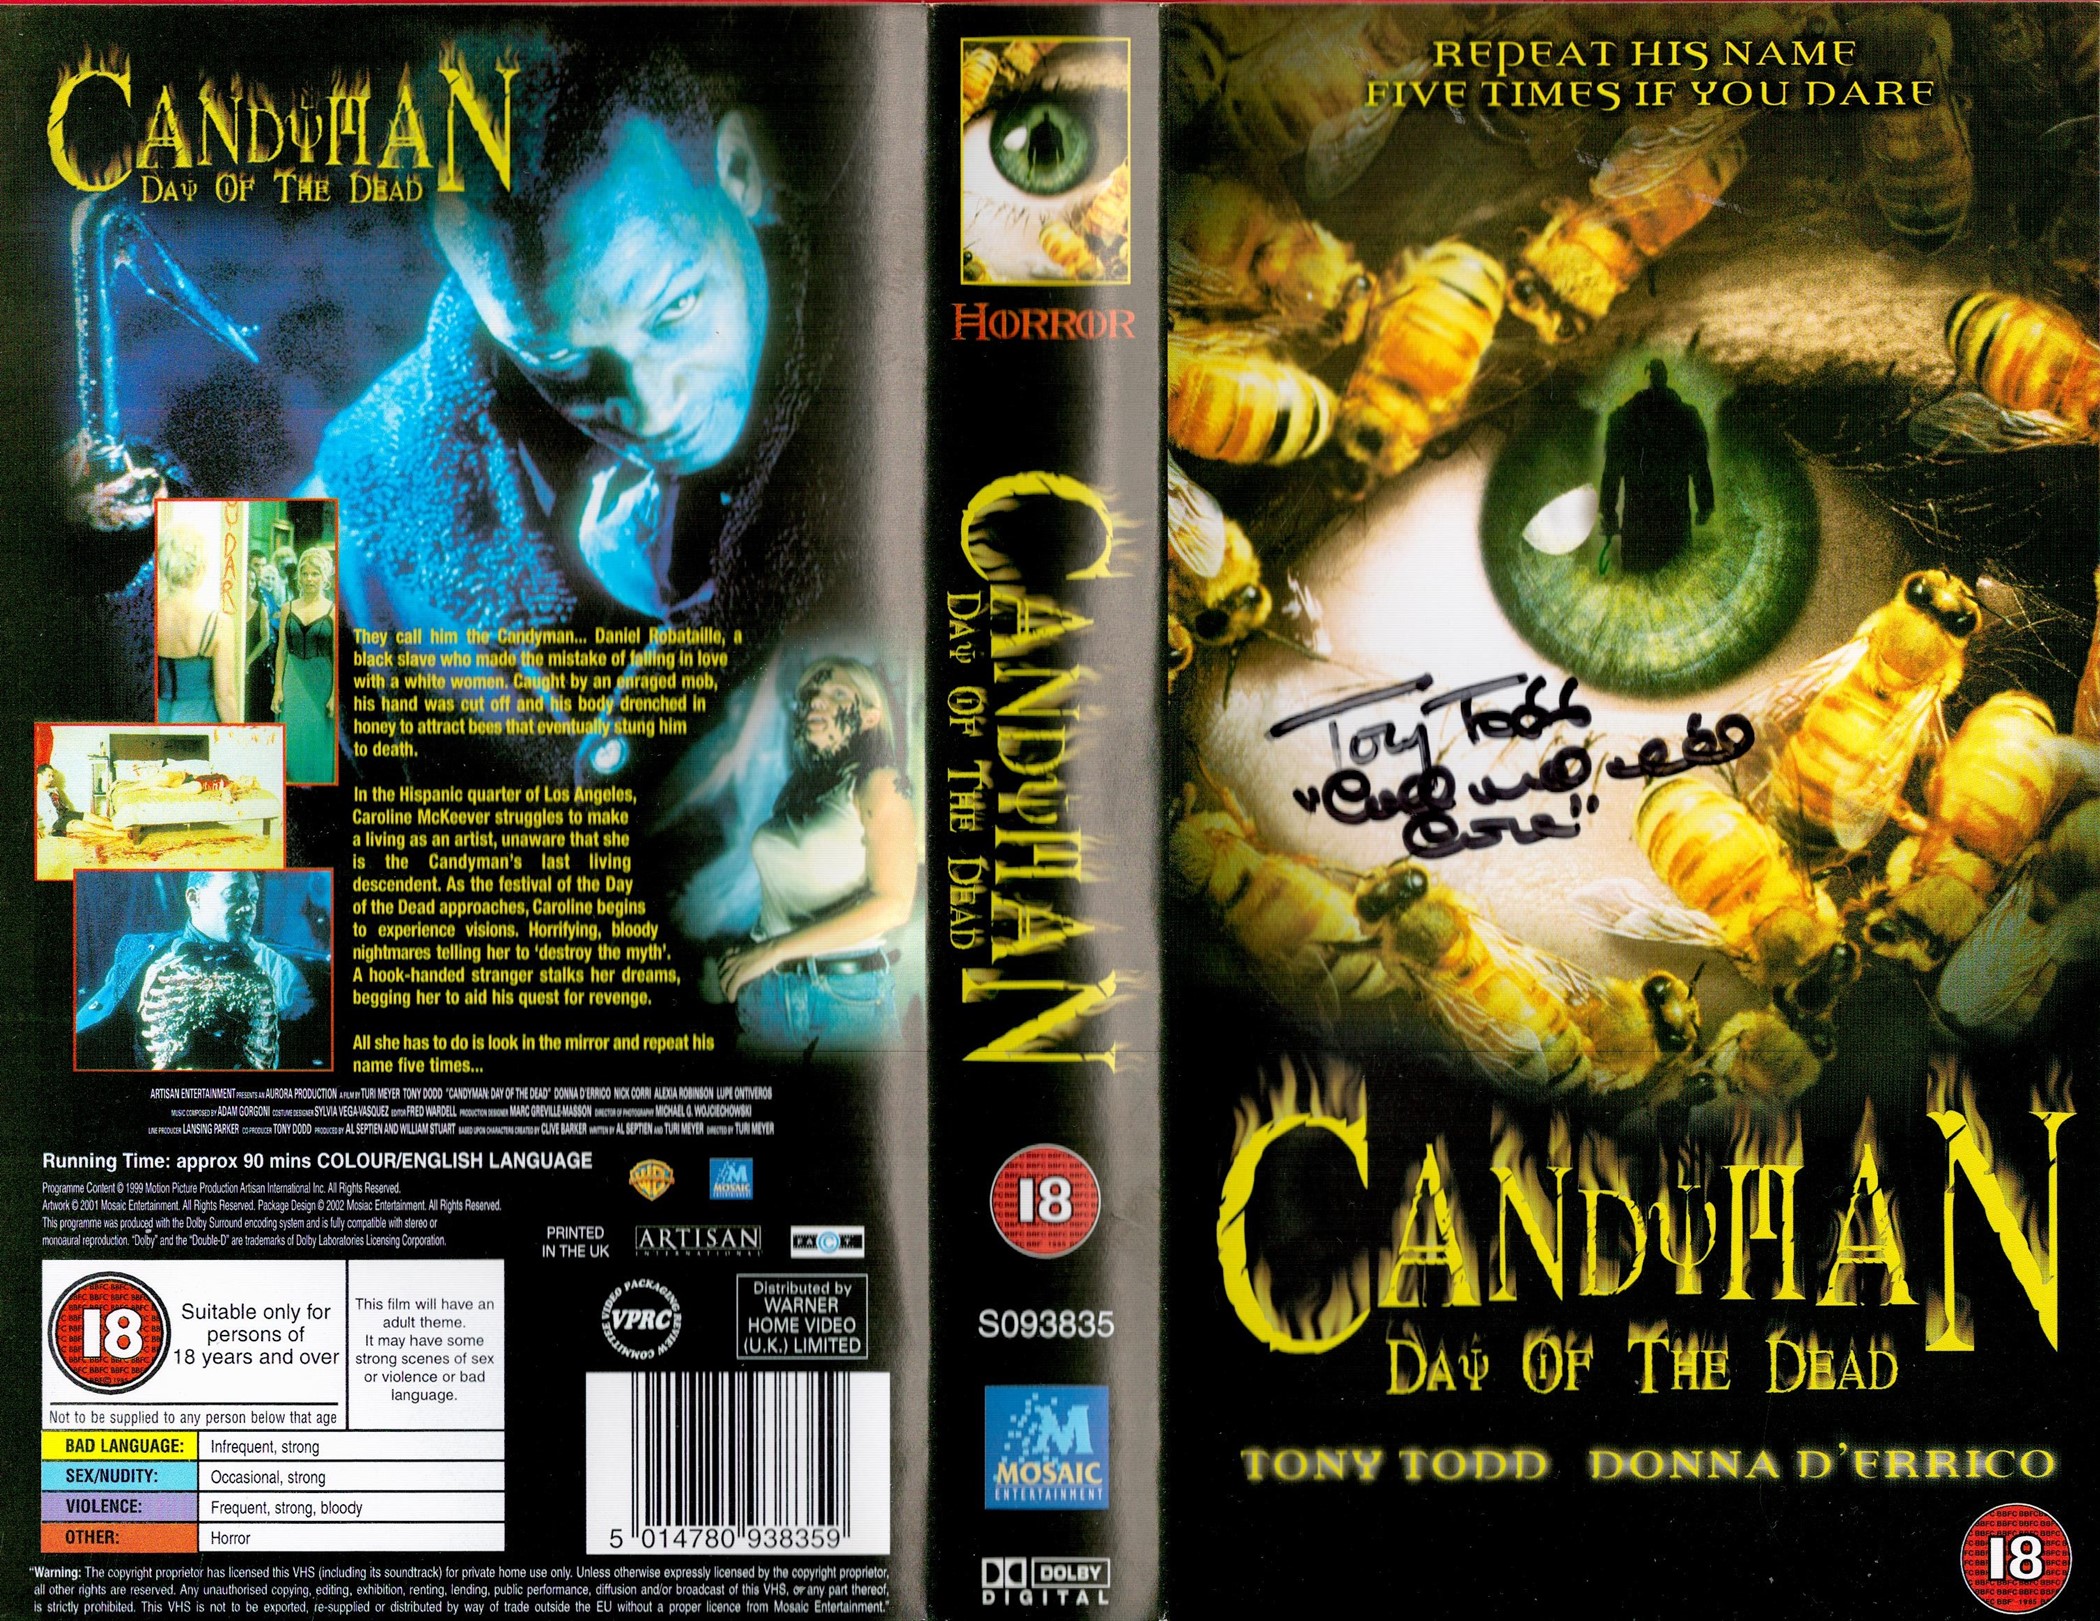 Tony Todd (Candyman) Handsigned VHS with Case Titled Candyman- Day Of The Dead. Todd Signed on the